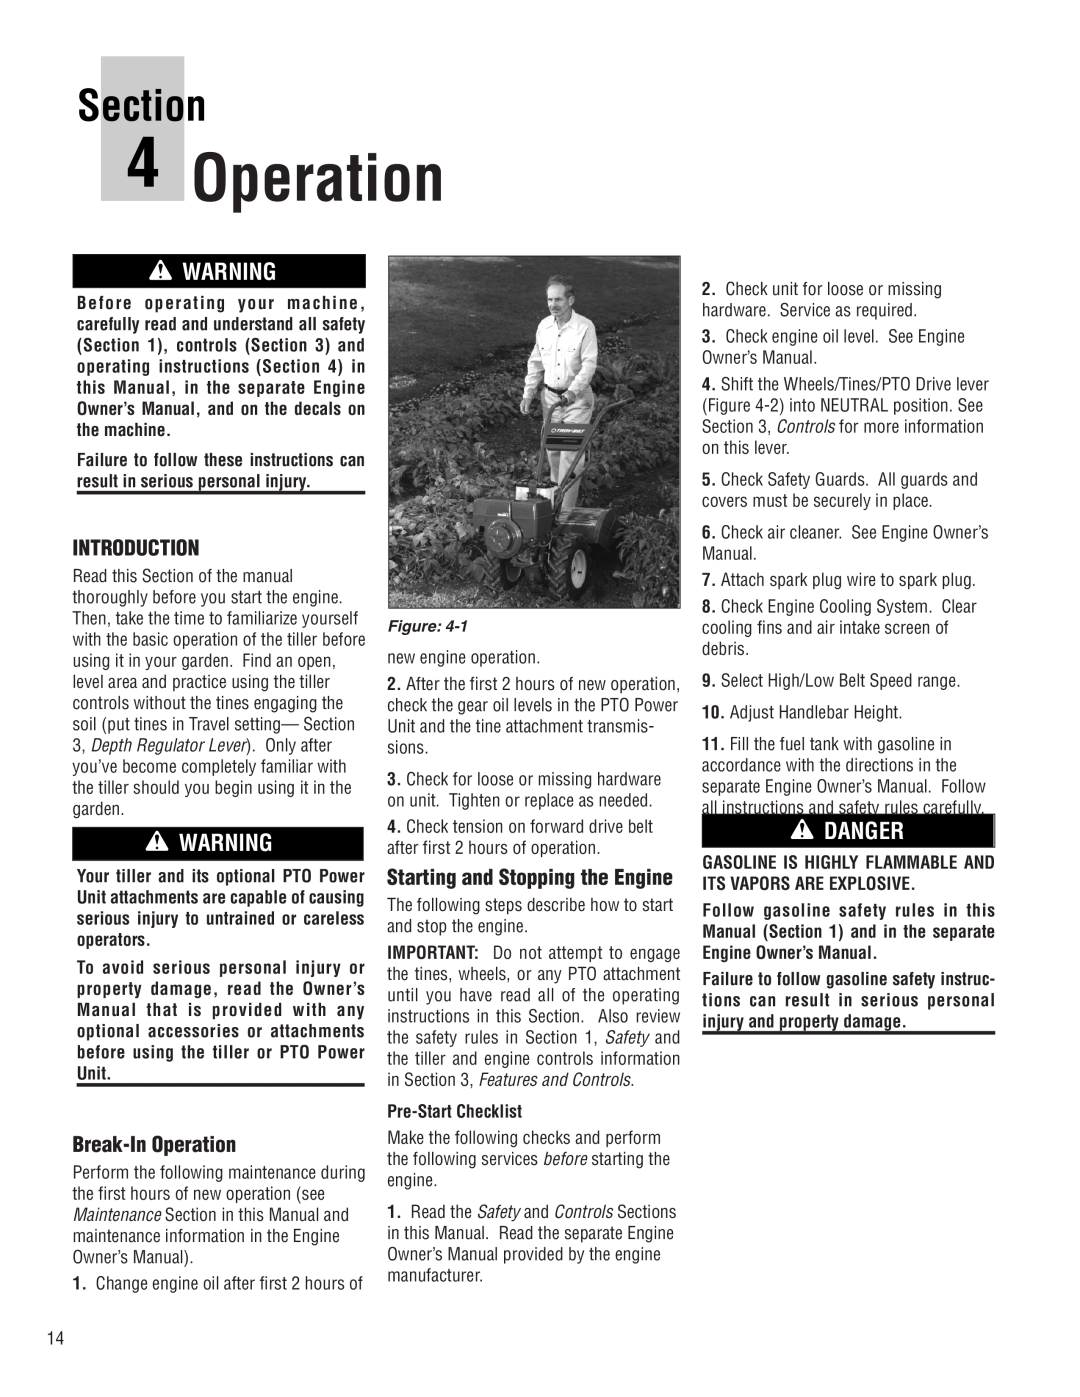 Troy-Bilt E683G, 683F Introduction, Break-In Operation, Starting and Stopping the Engine, Pre-Start Checklist, Section 